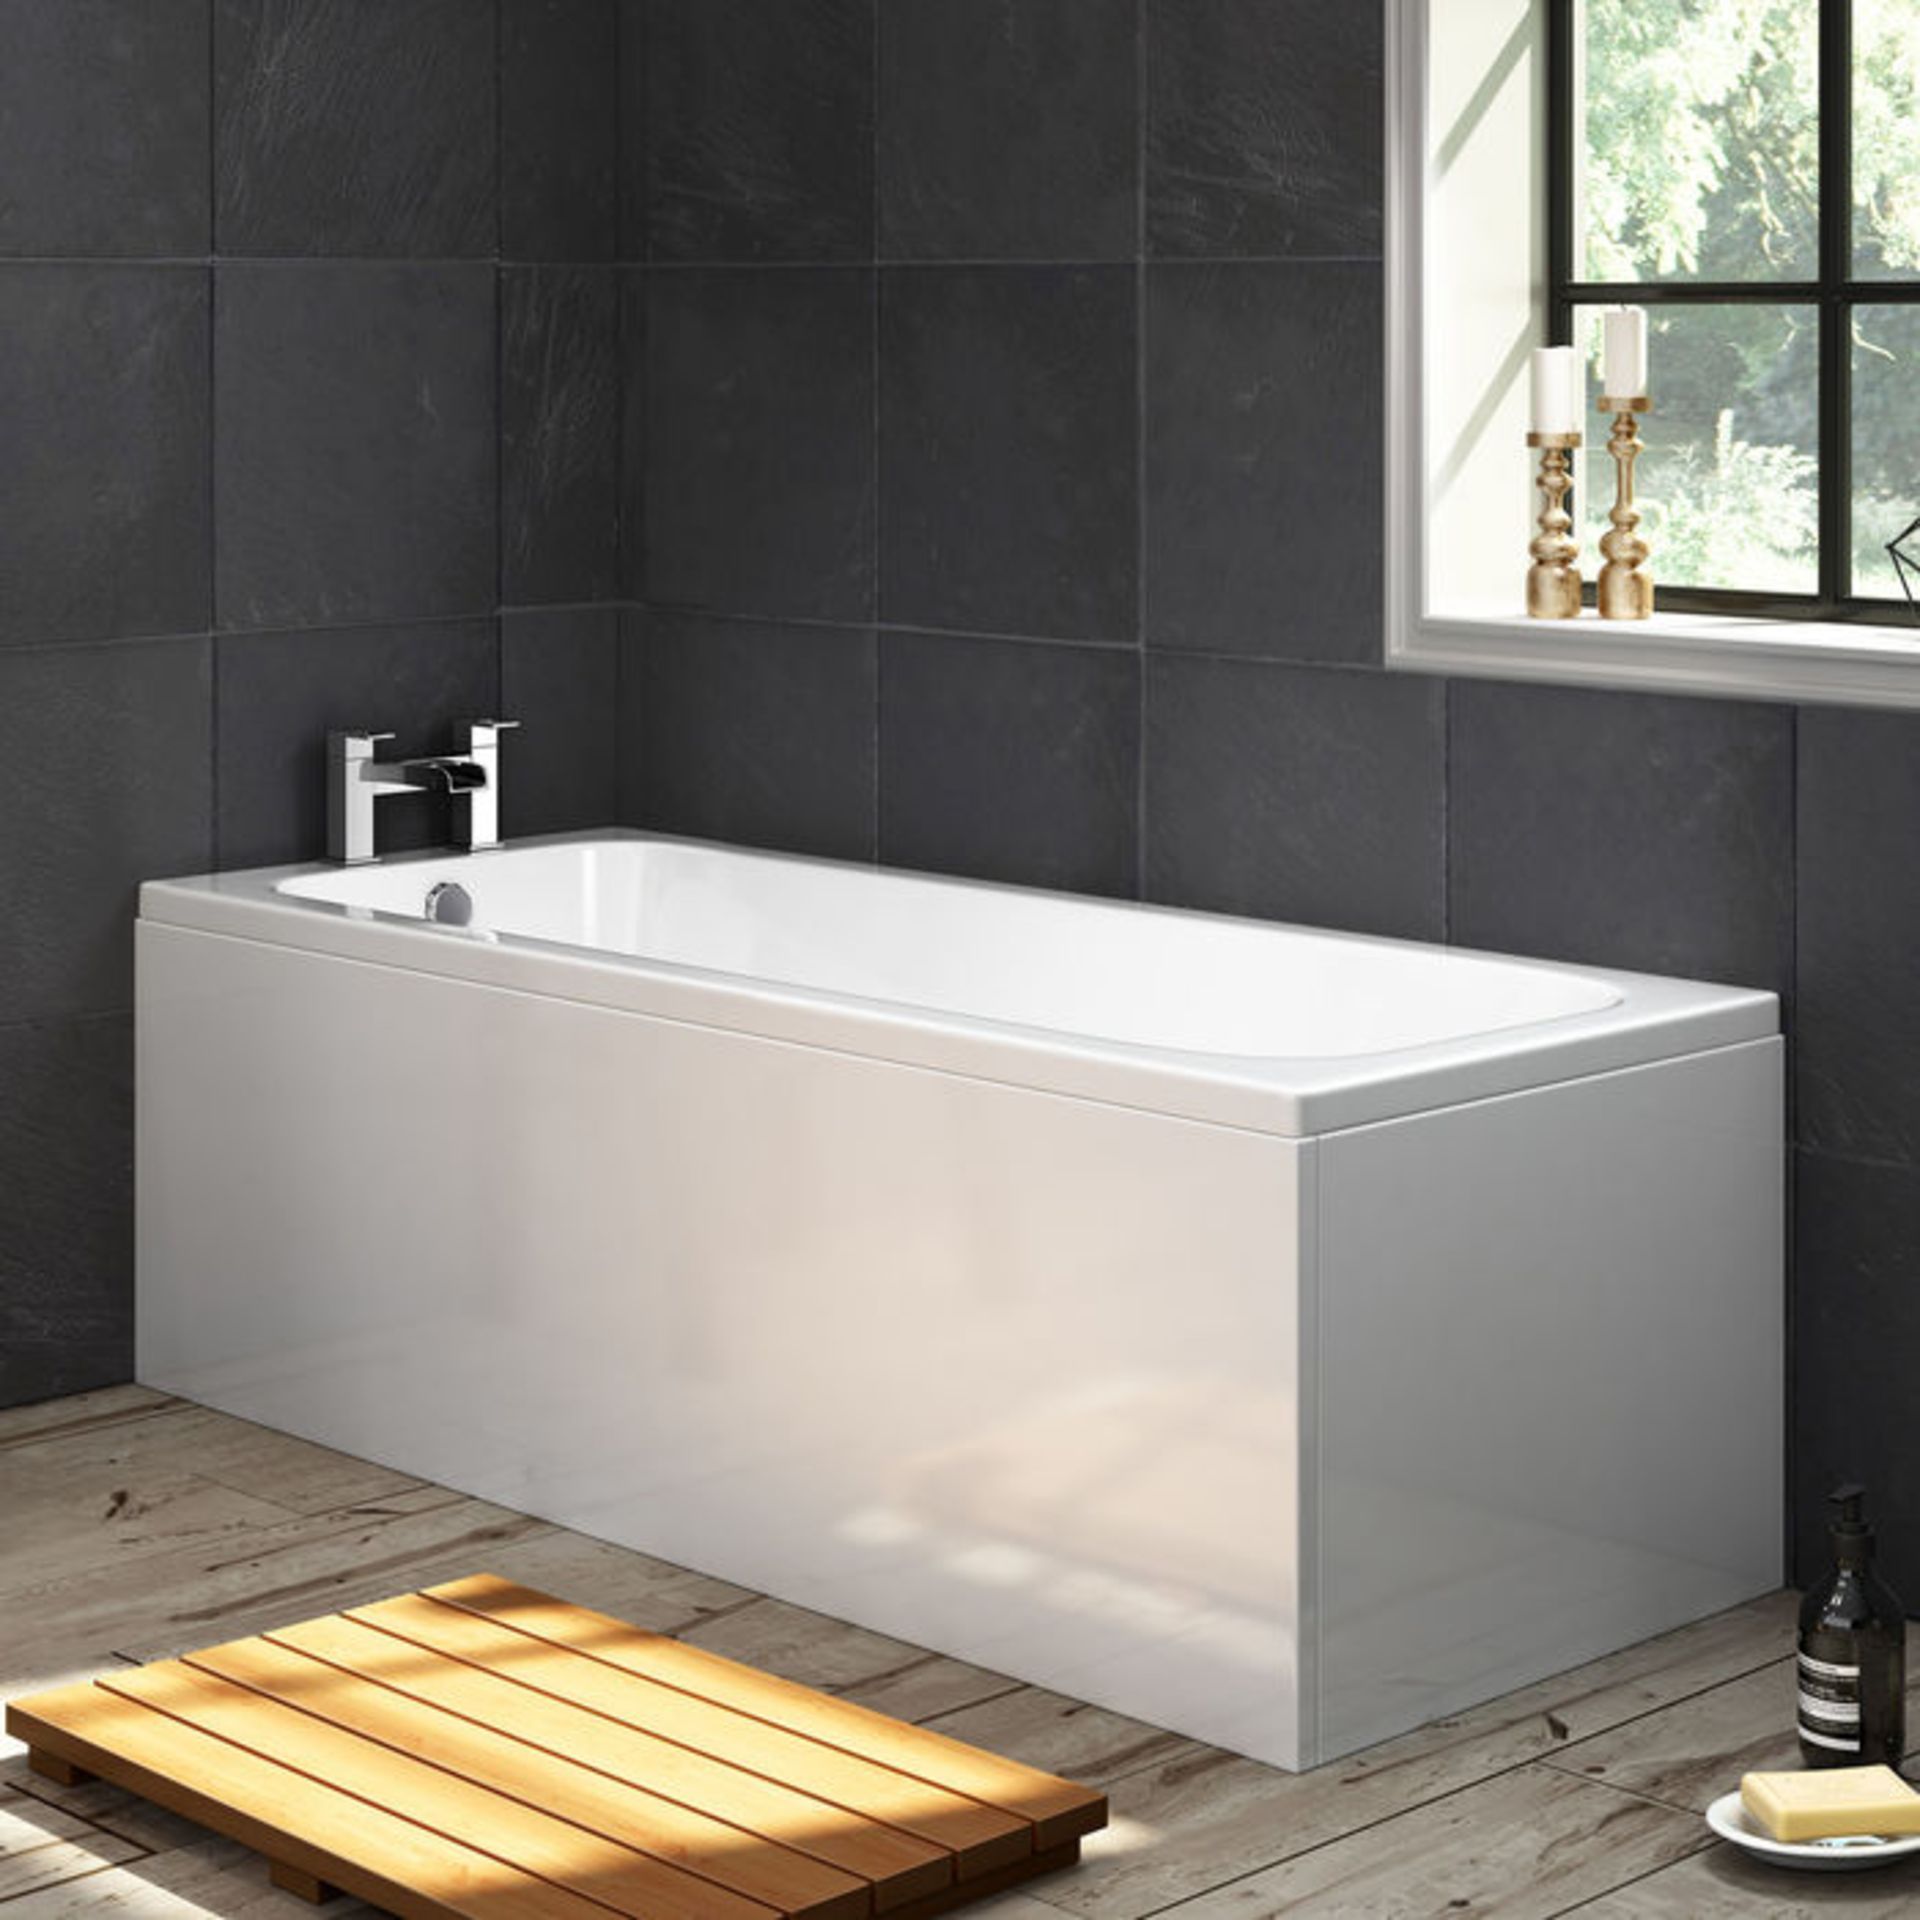 New (U47) 1700x700mm Steel Round Single Ended Bath With Side And Front Panels. Rrp £299.99.L...